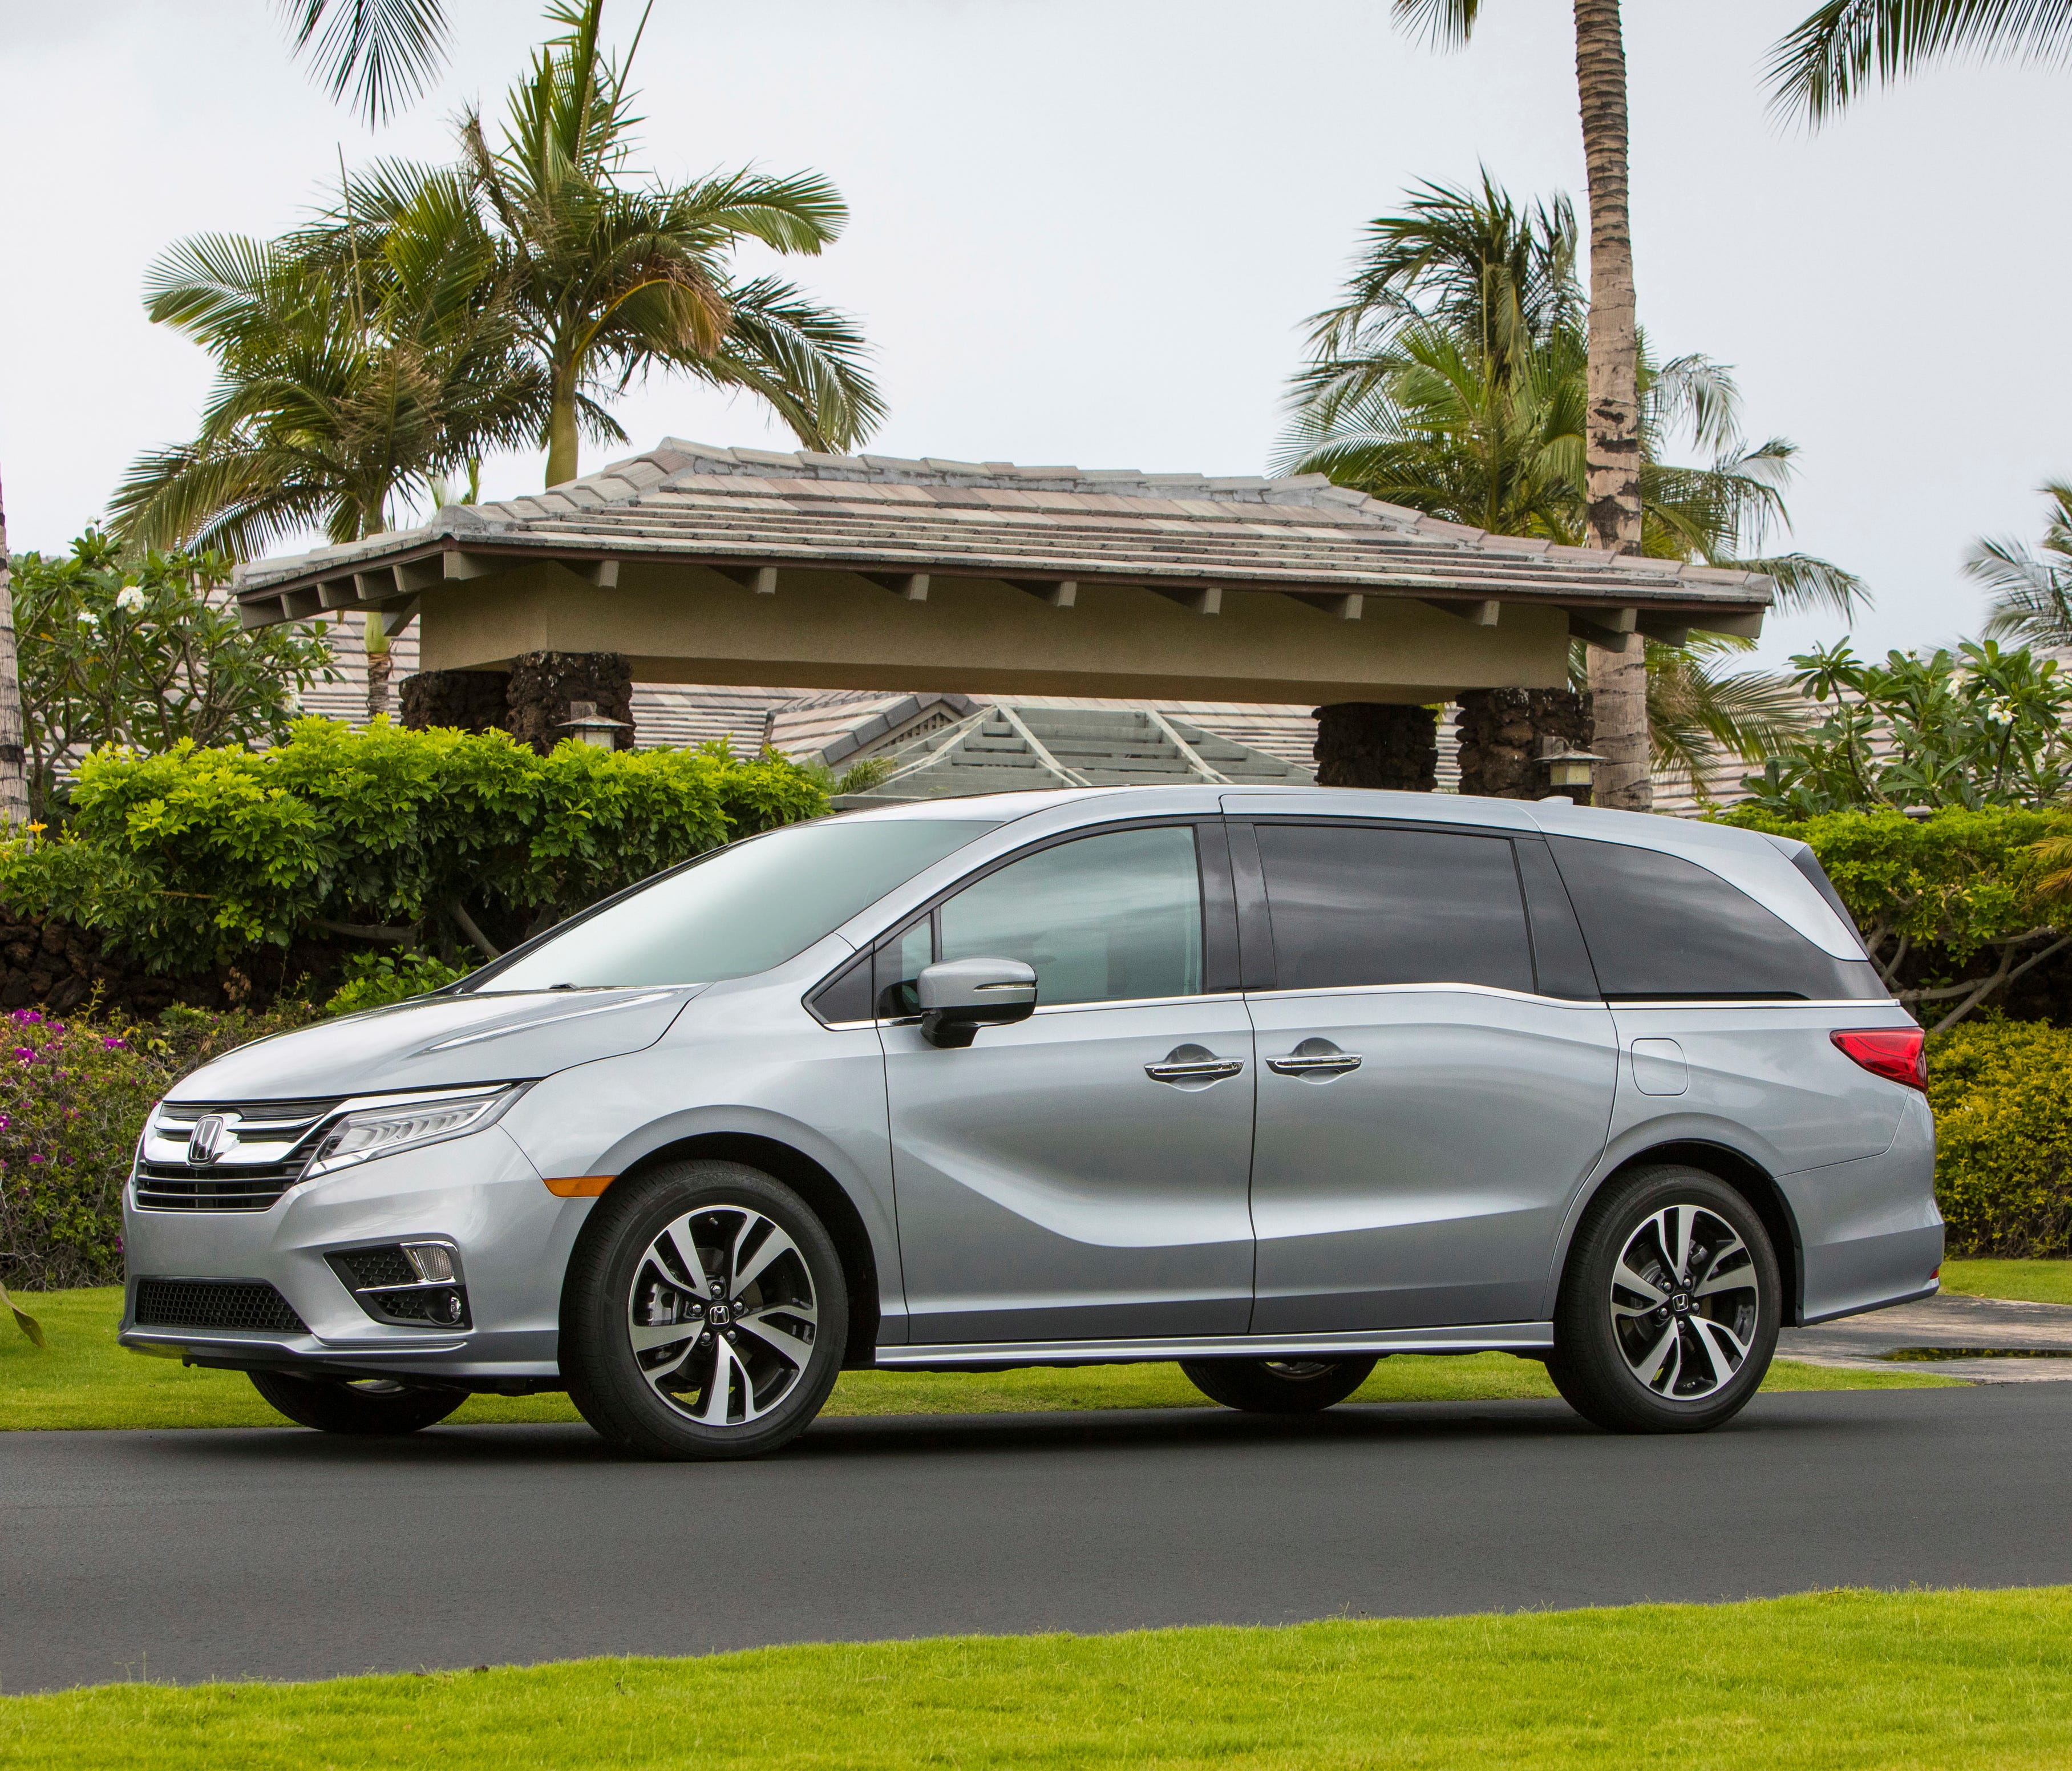 This photo provided by Honda shows the 2018 Honda Odyssey minivan. Fully redesigned this year, the Odyssey is enjoyable to drive and well-suited to families with young kids.